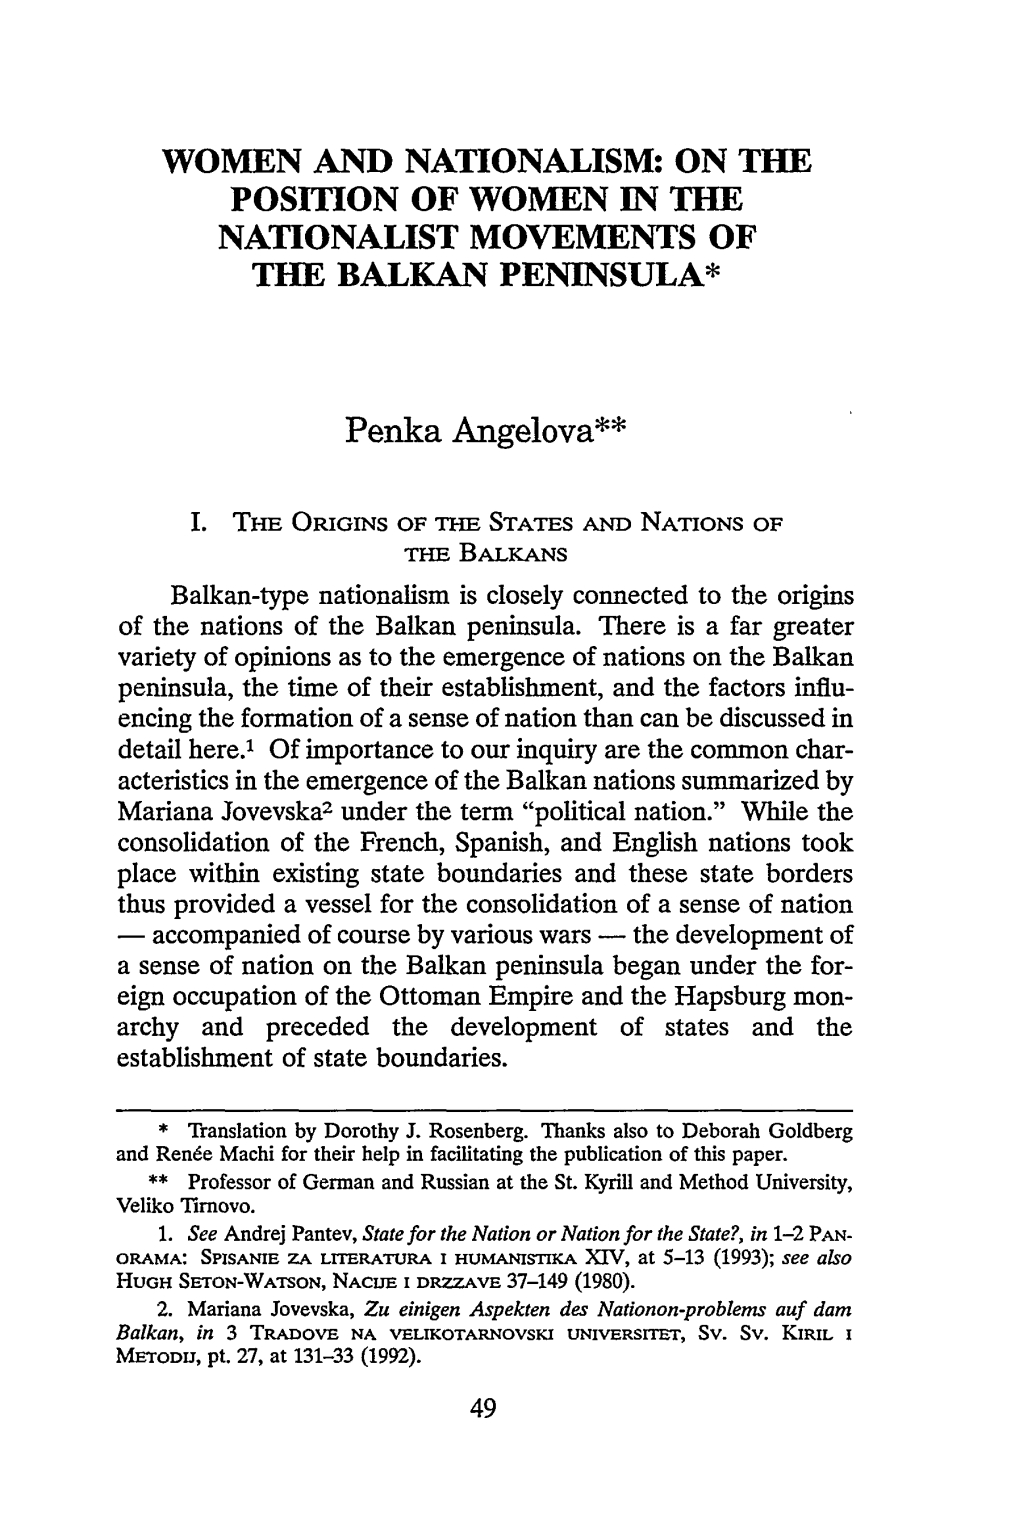 Women and Nationalism: on the Position of Women in the Nationalist Movements of the Balkan Peninsula*